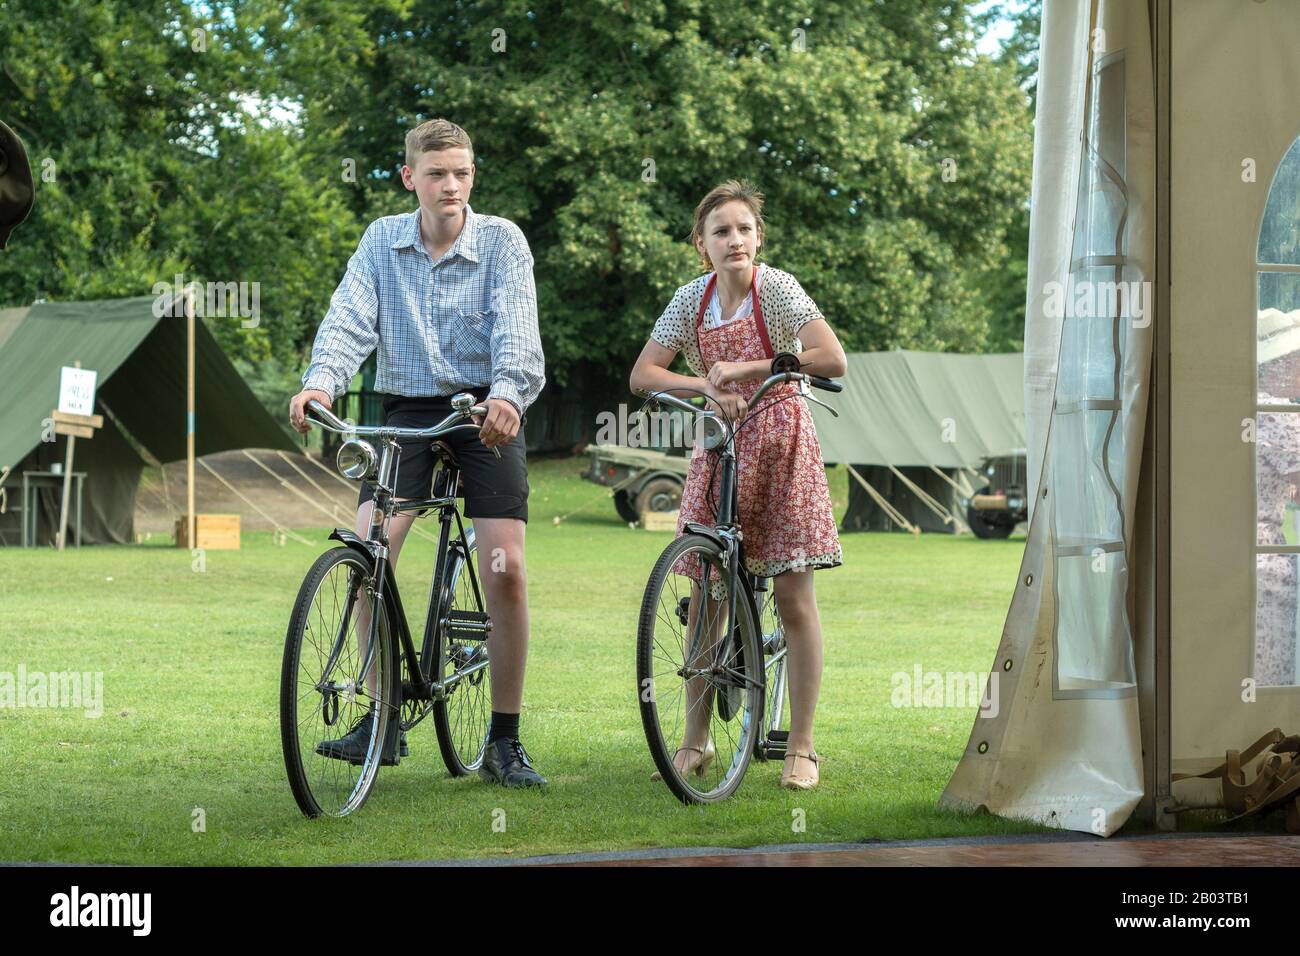 teenagers on Old grandad bikes stop and look into tent WWII dress costume reenactment World War II girl and boy on old bicycles Stock Photo